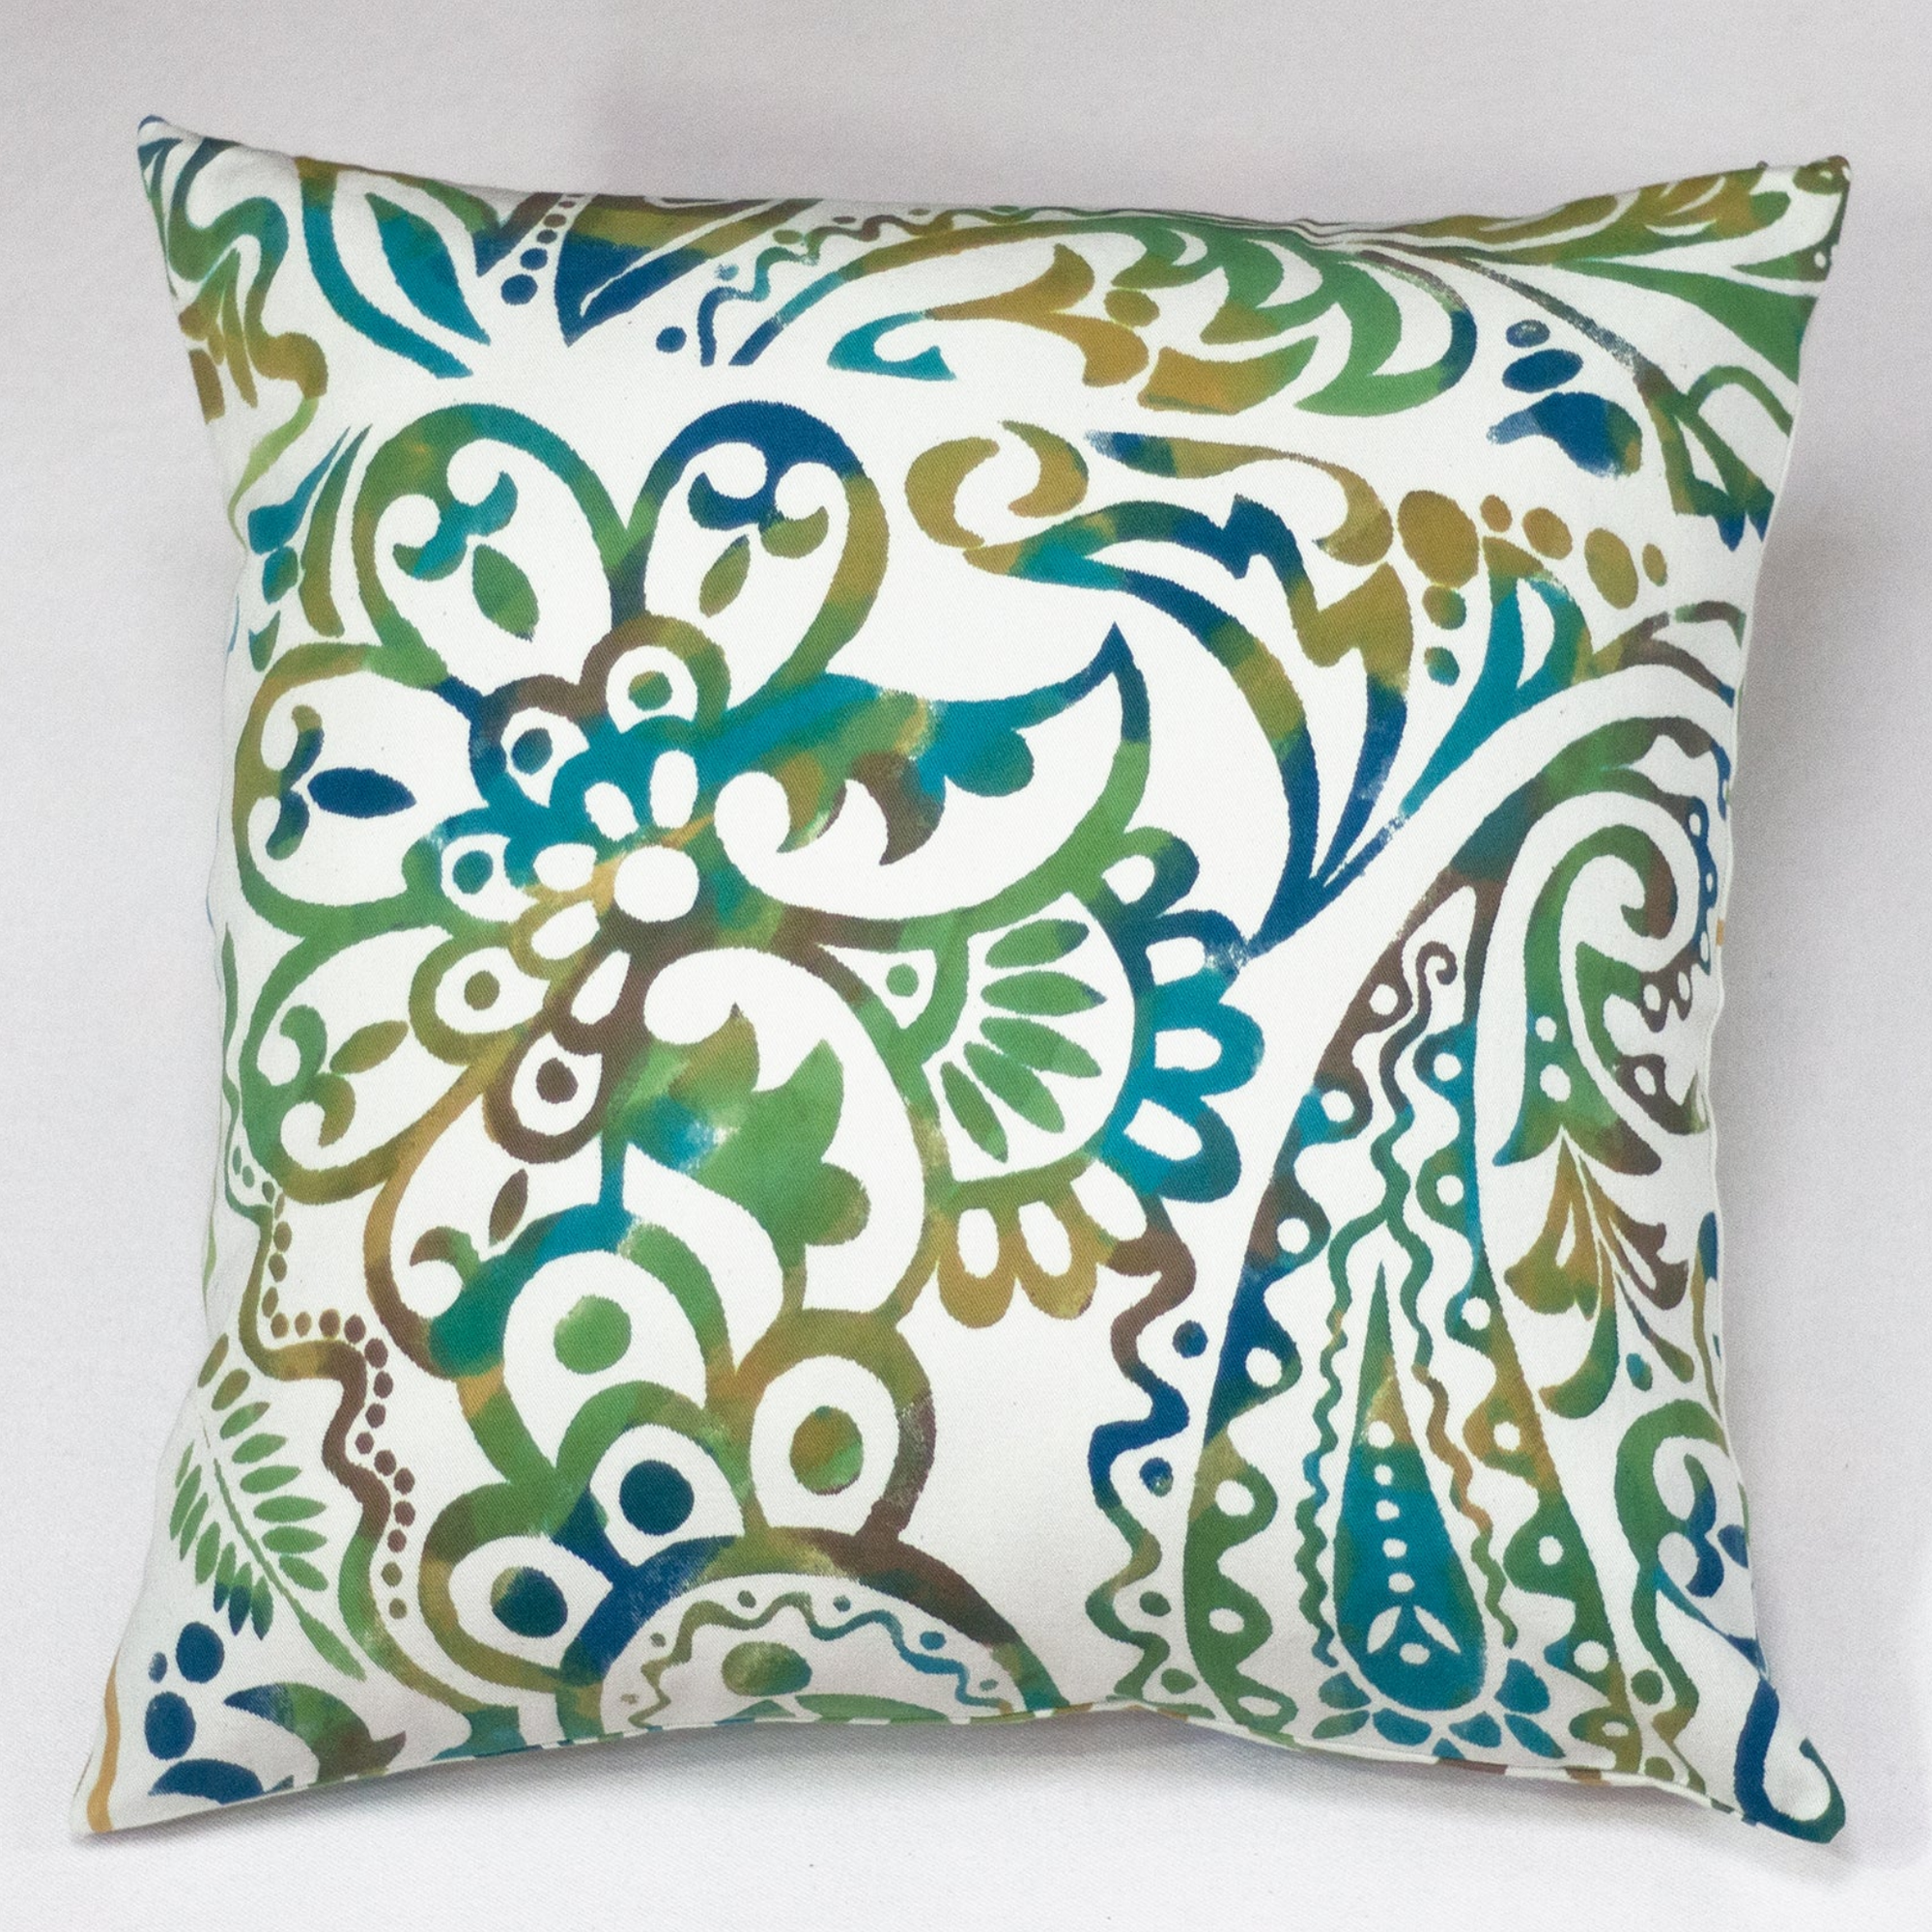 Hand Painted Accent Pillow Cover - Boundary Waters - Verdi & Gold